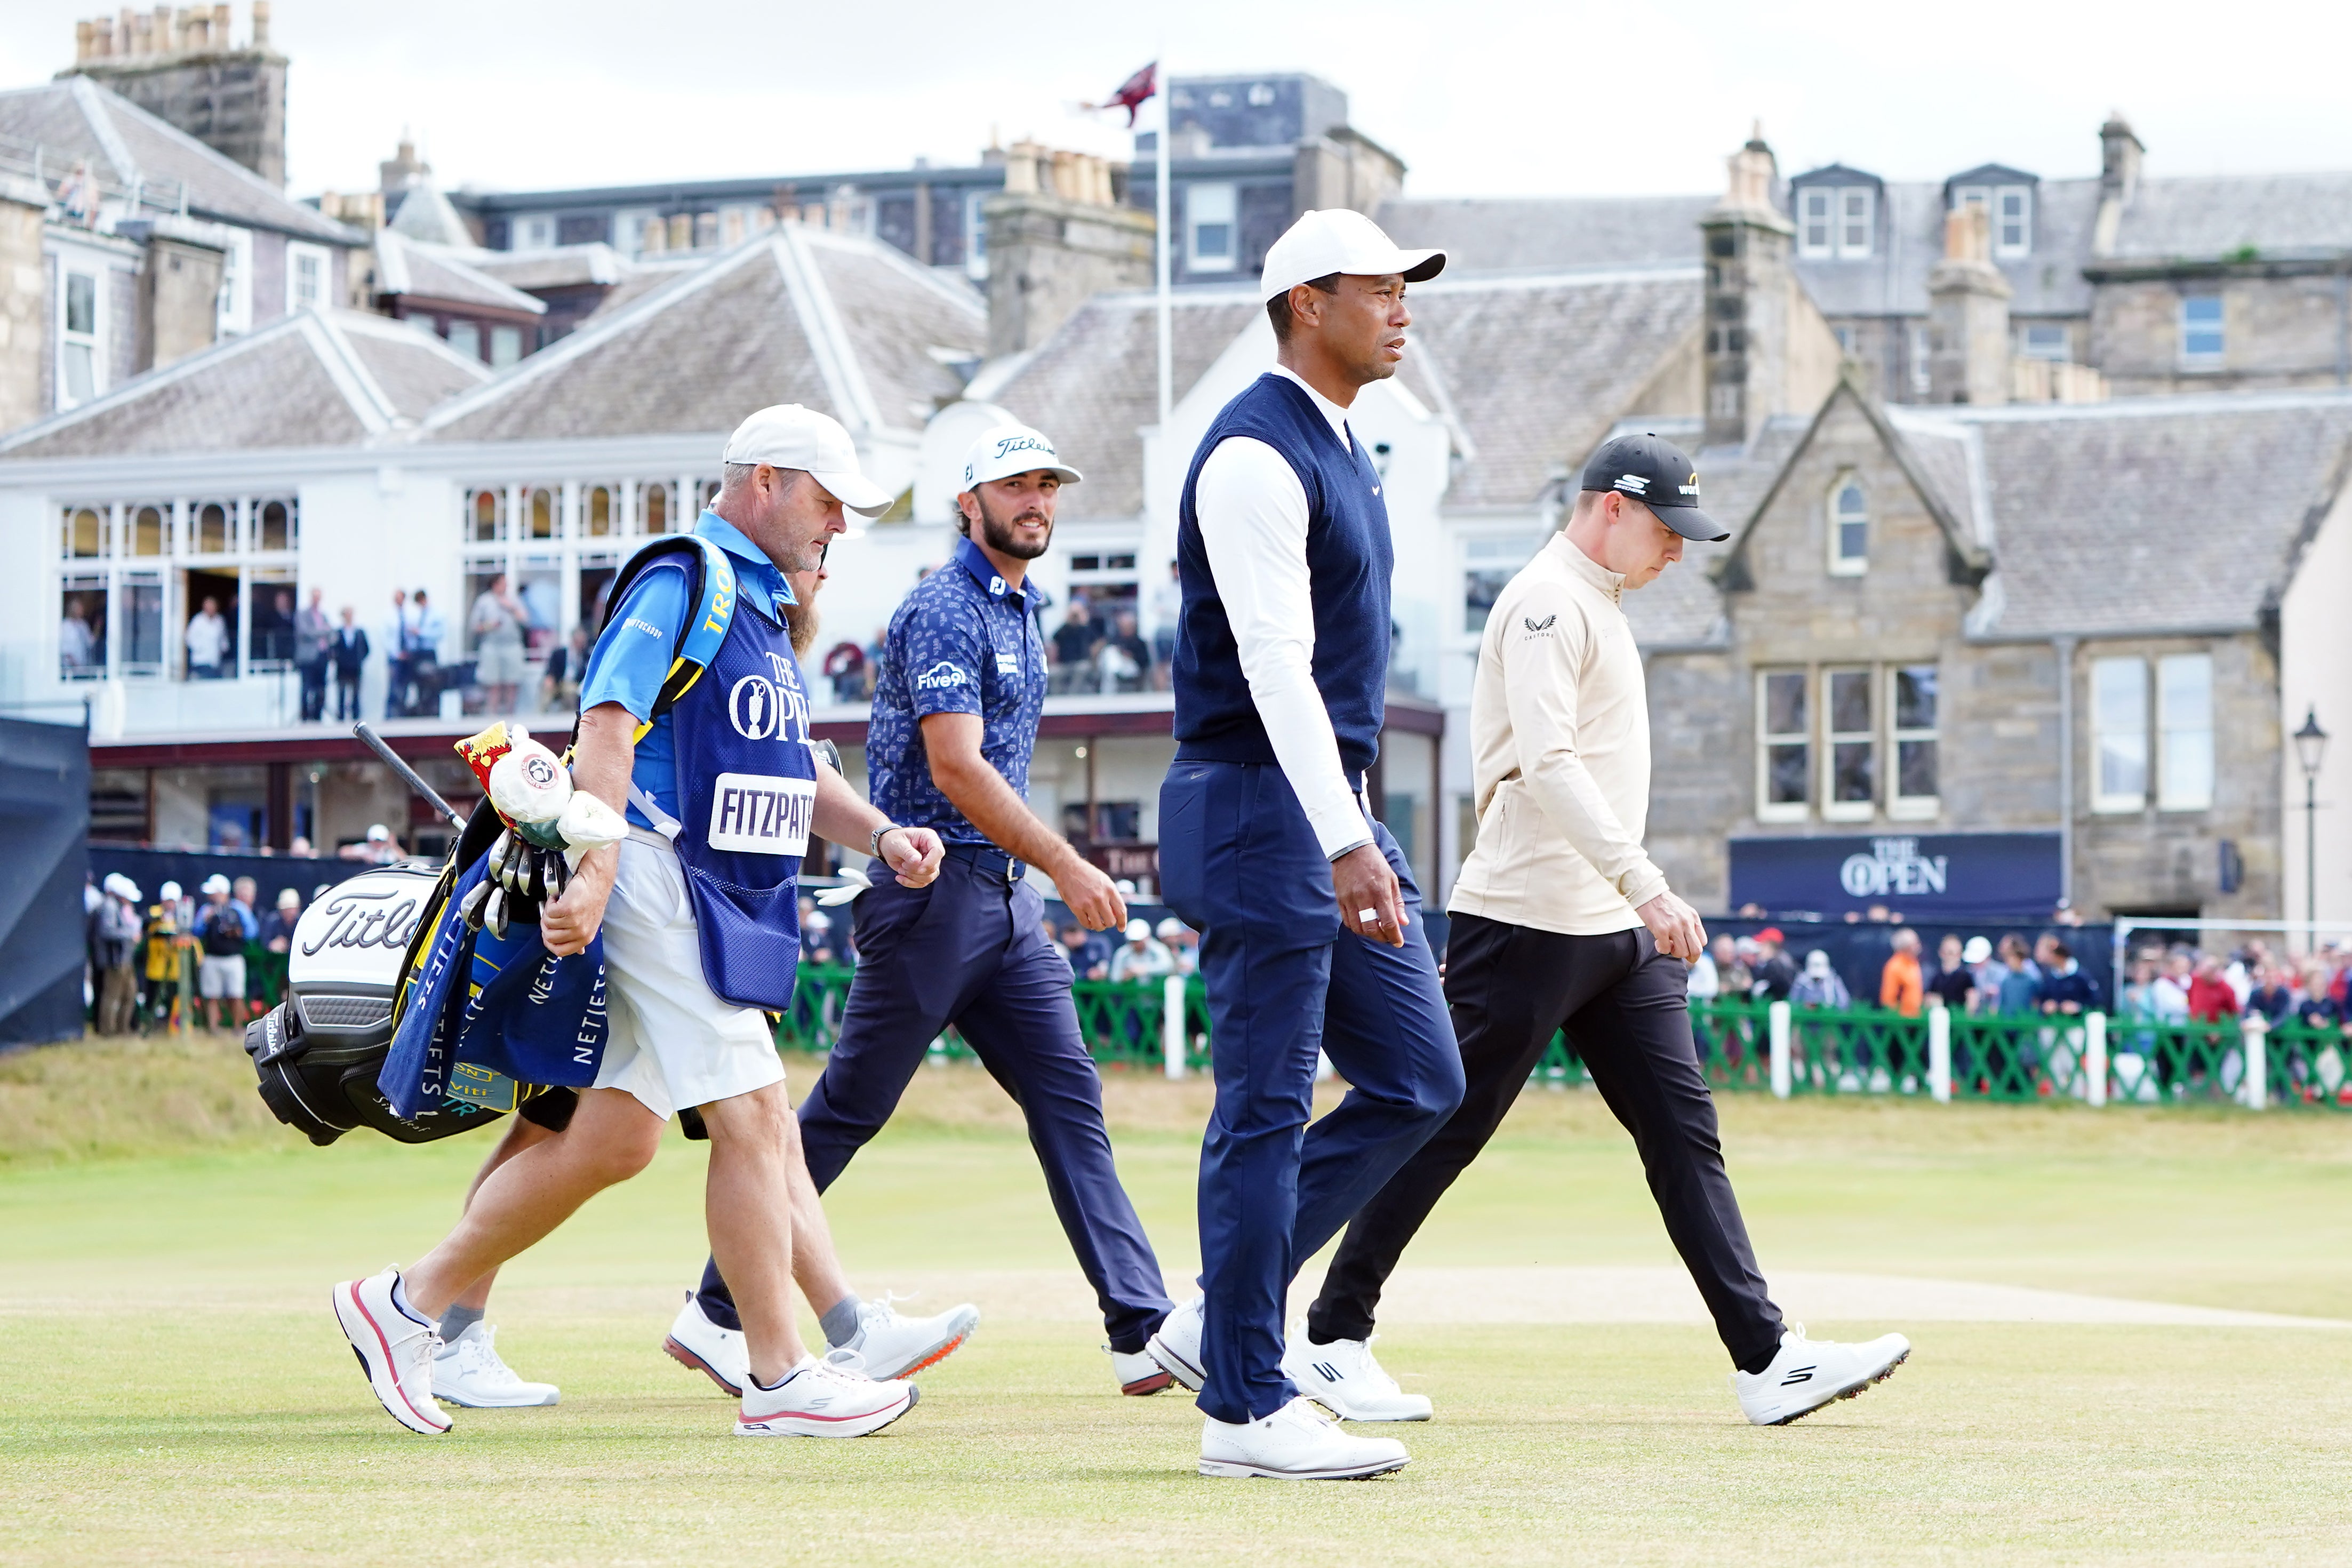 Tiger Woods, Max Homa and Matt Fitzpatrick make their way down the 1st fairway during day one of The Open at St Andrews (Jane Barlow/PA)